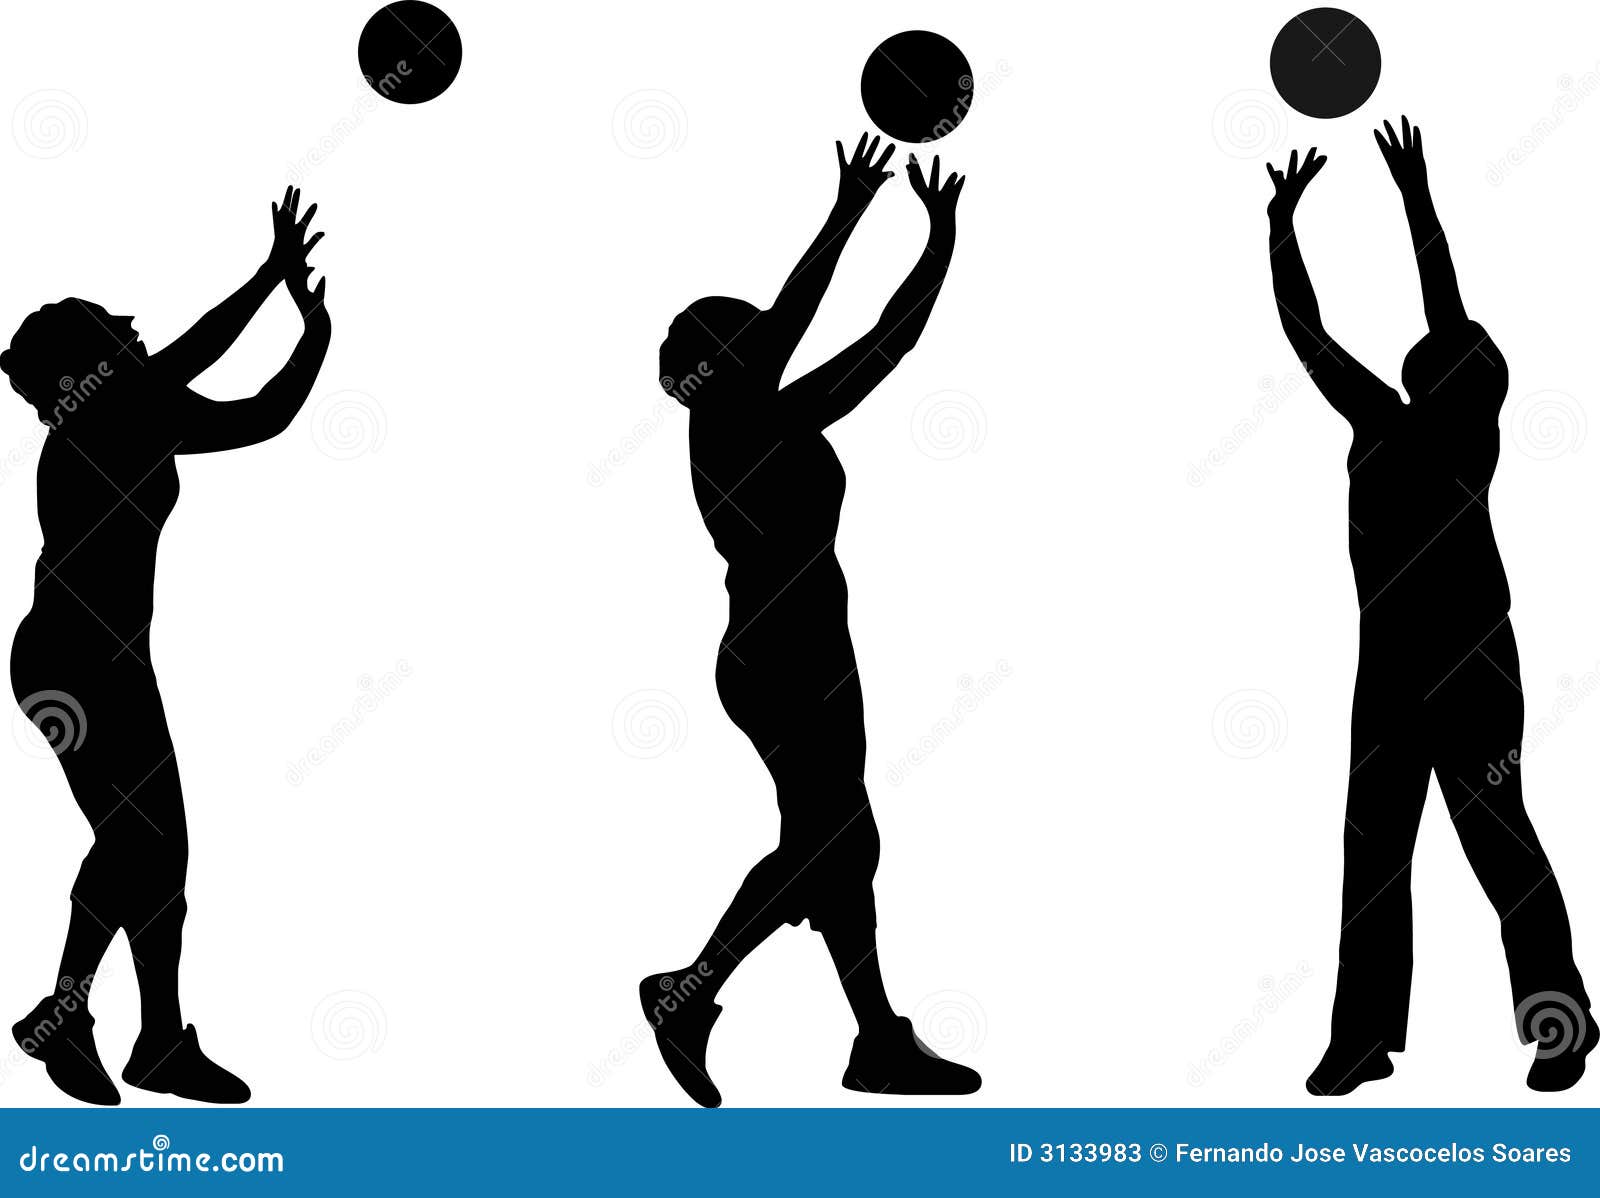 volleyball silhouette clip art - photo #31